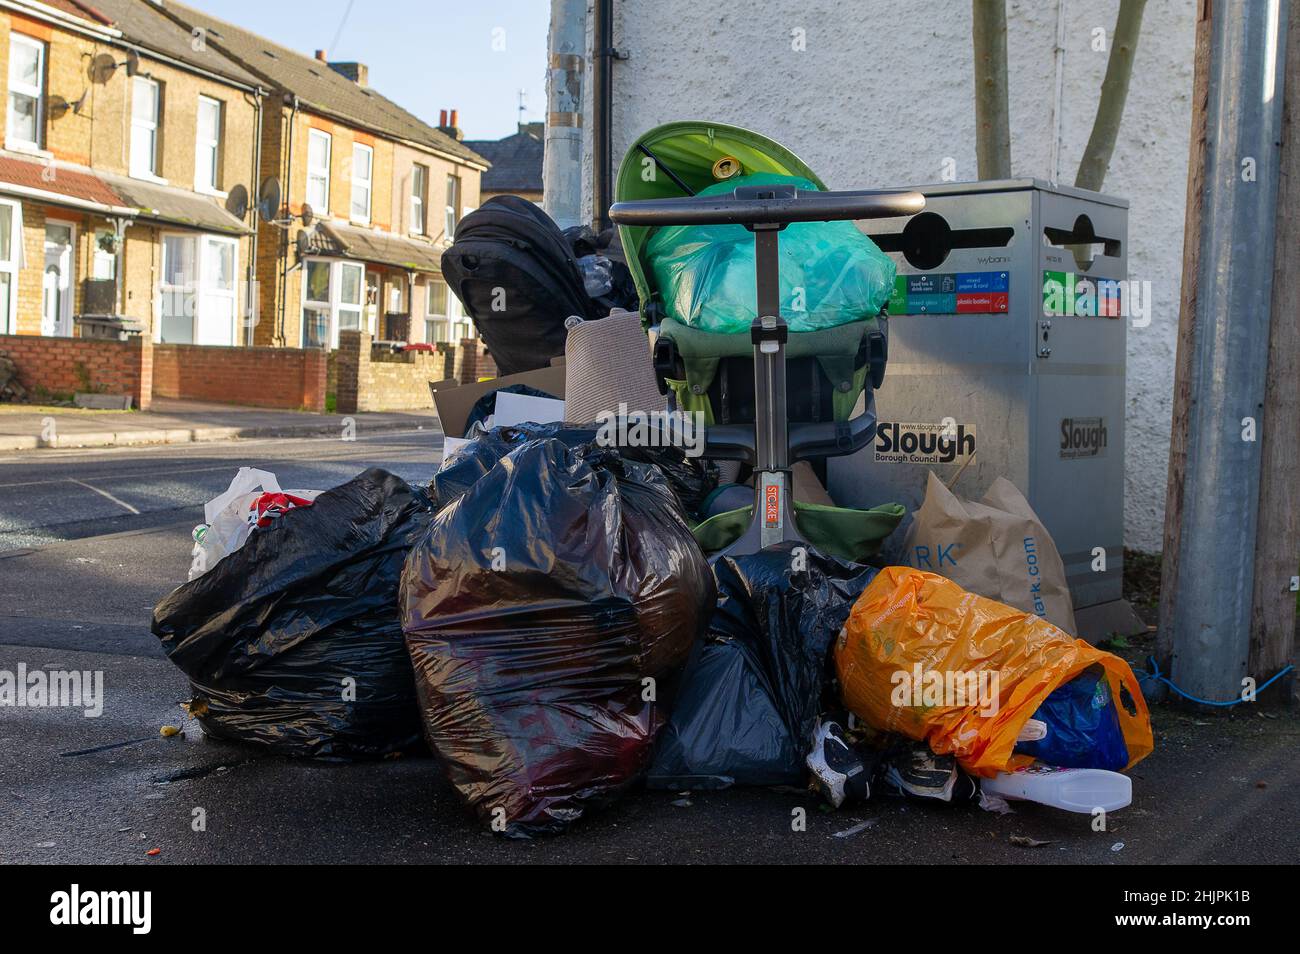 Slough, Berkshire, UK. 31st January, 2022. New figures from the Department for Environment, Food and Rural Affairs (Defra) state that there were 10,547 incidents of fly tipping in Berkshire between 2020 and 2021. Residents continue to fly tip rubbish in Chalvey, Slough despite the area being under surveillance and clear warning signs of fines of up £50,000 or 12 months imprisonment for those convicted of fly tipping. Ironcially Chalvey has a huge free public waste tip for household waste. Credit: Maureen McLean/Alamy Live News Stock Photo